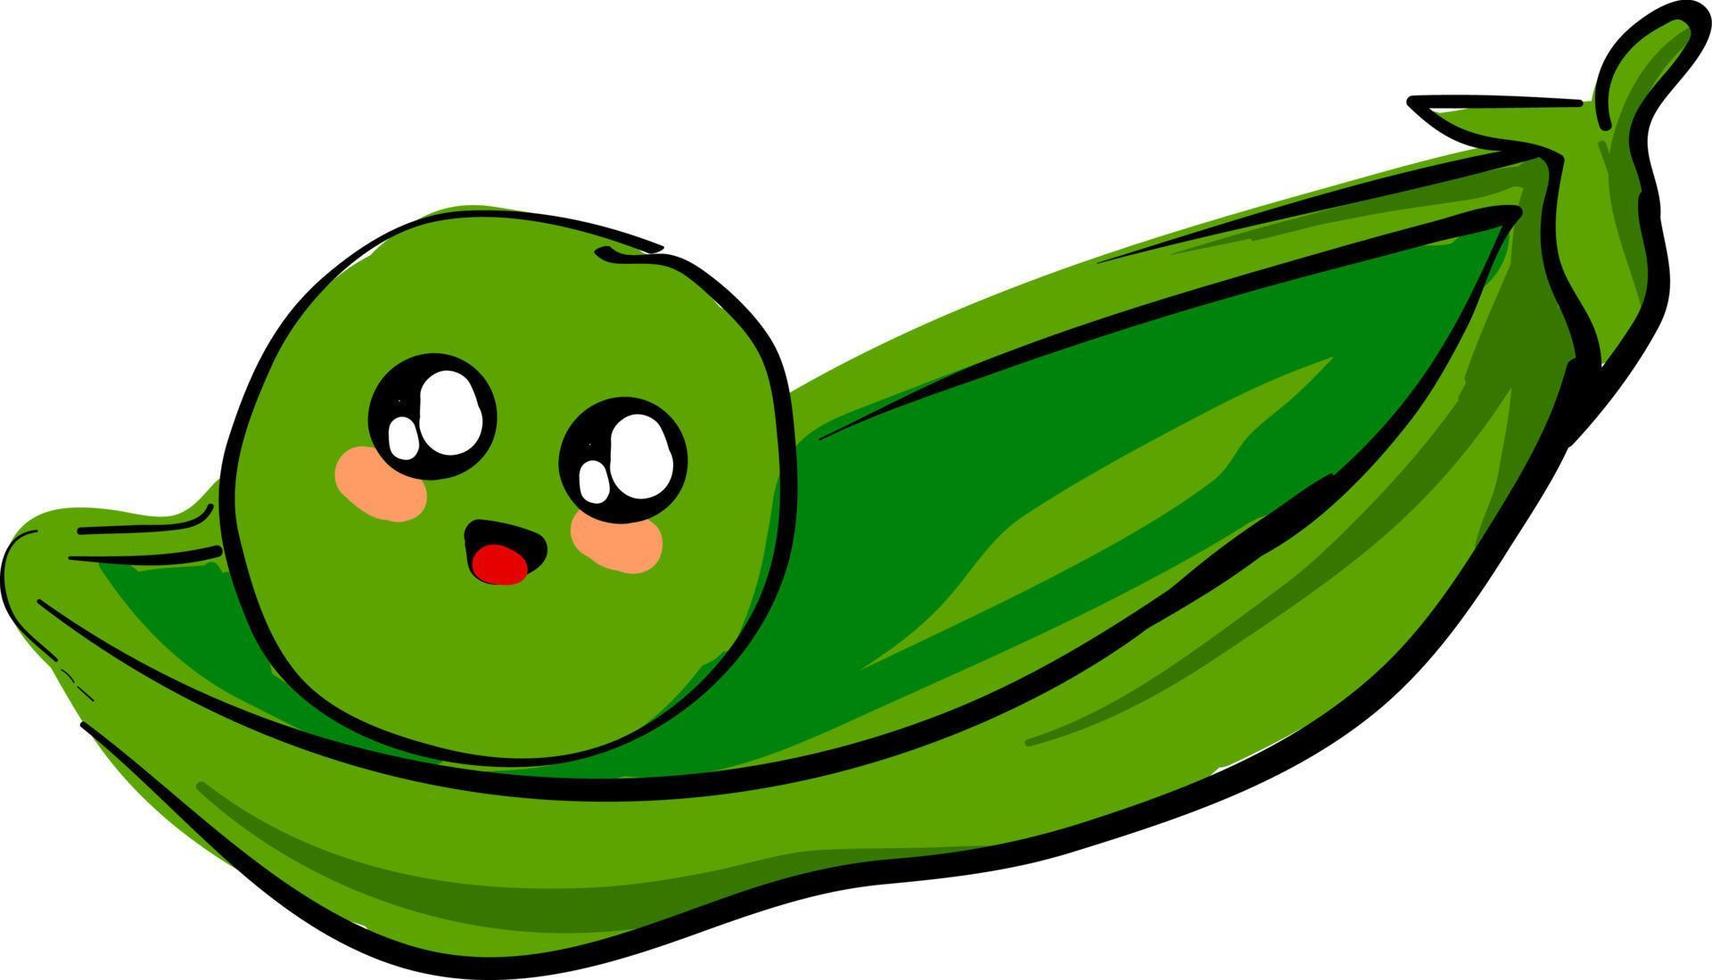 Cute little pea, illustration, vector on white background.